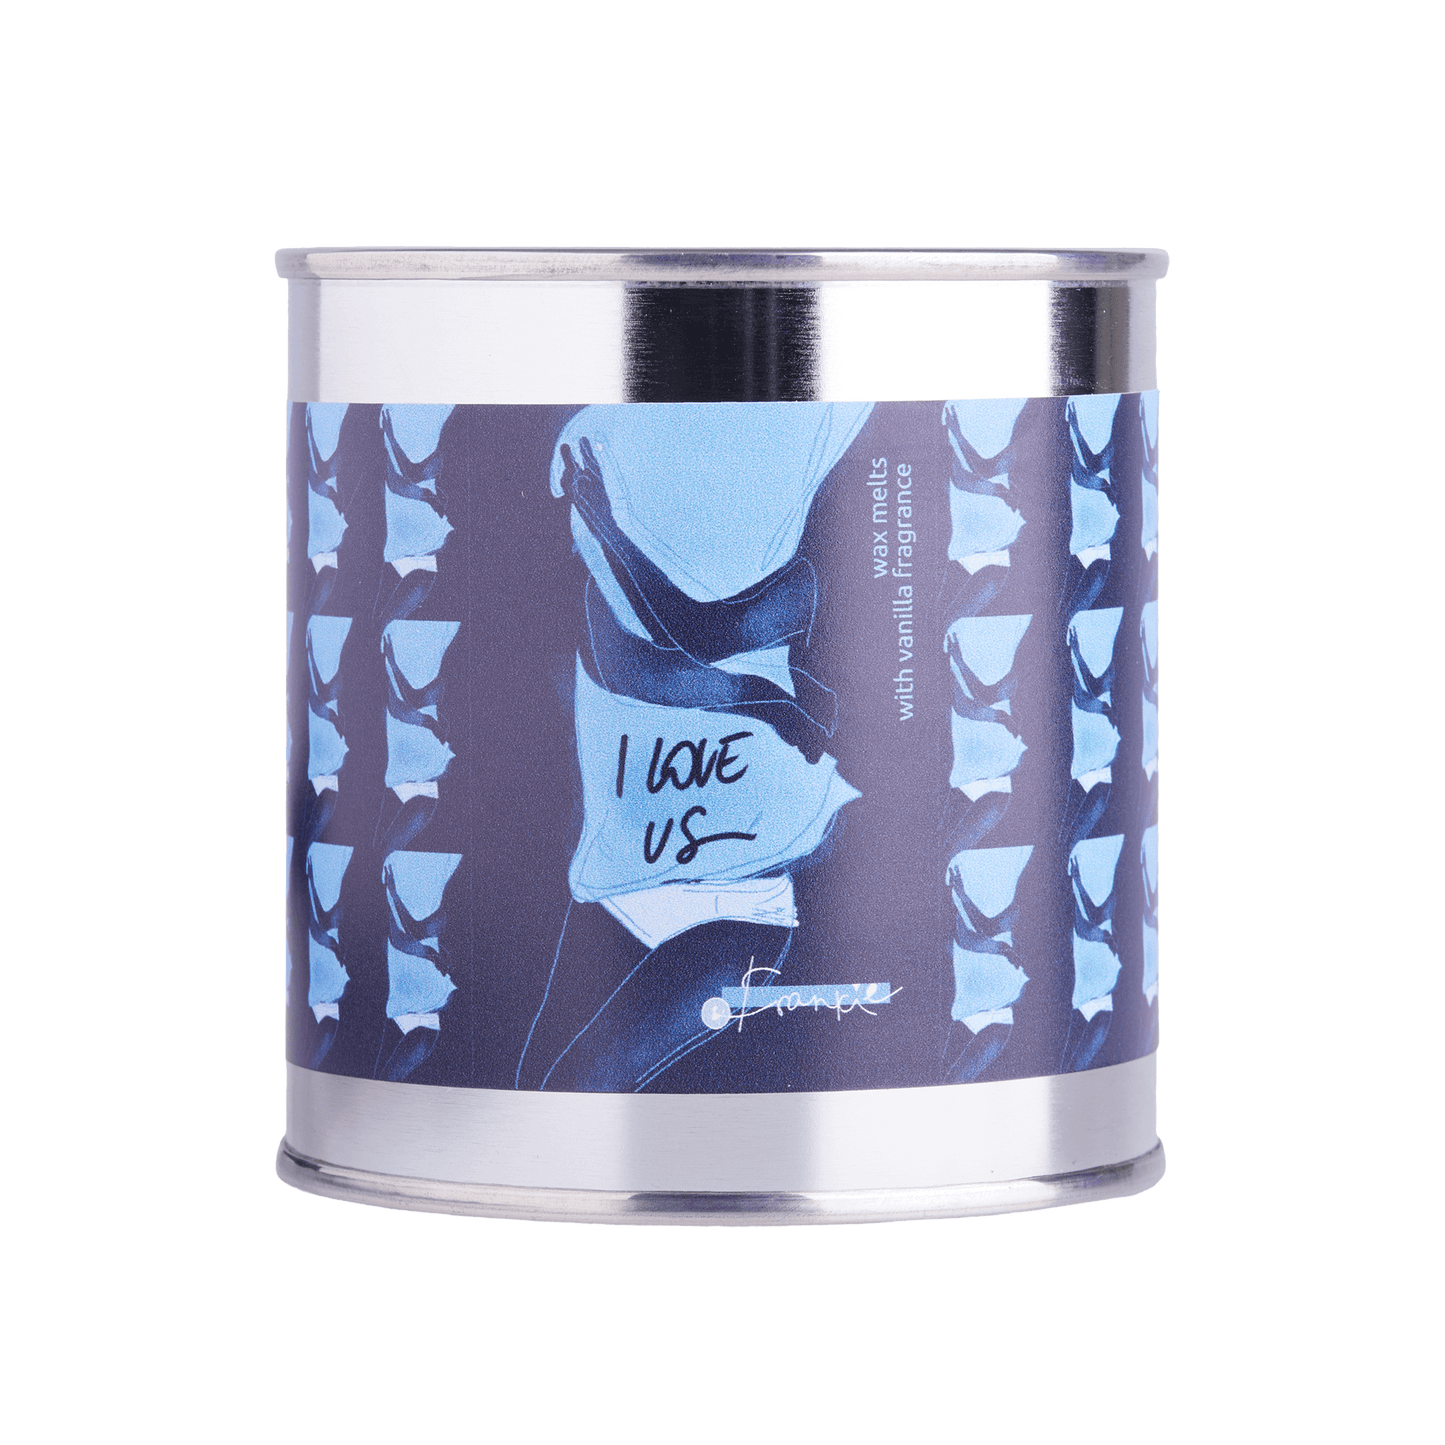 "I love us" soy wax melts in a can